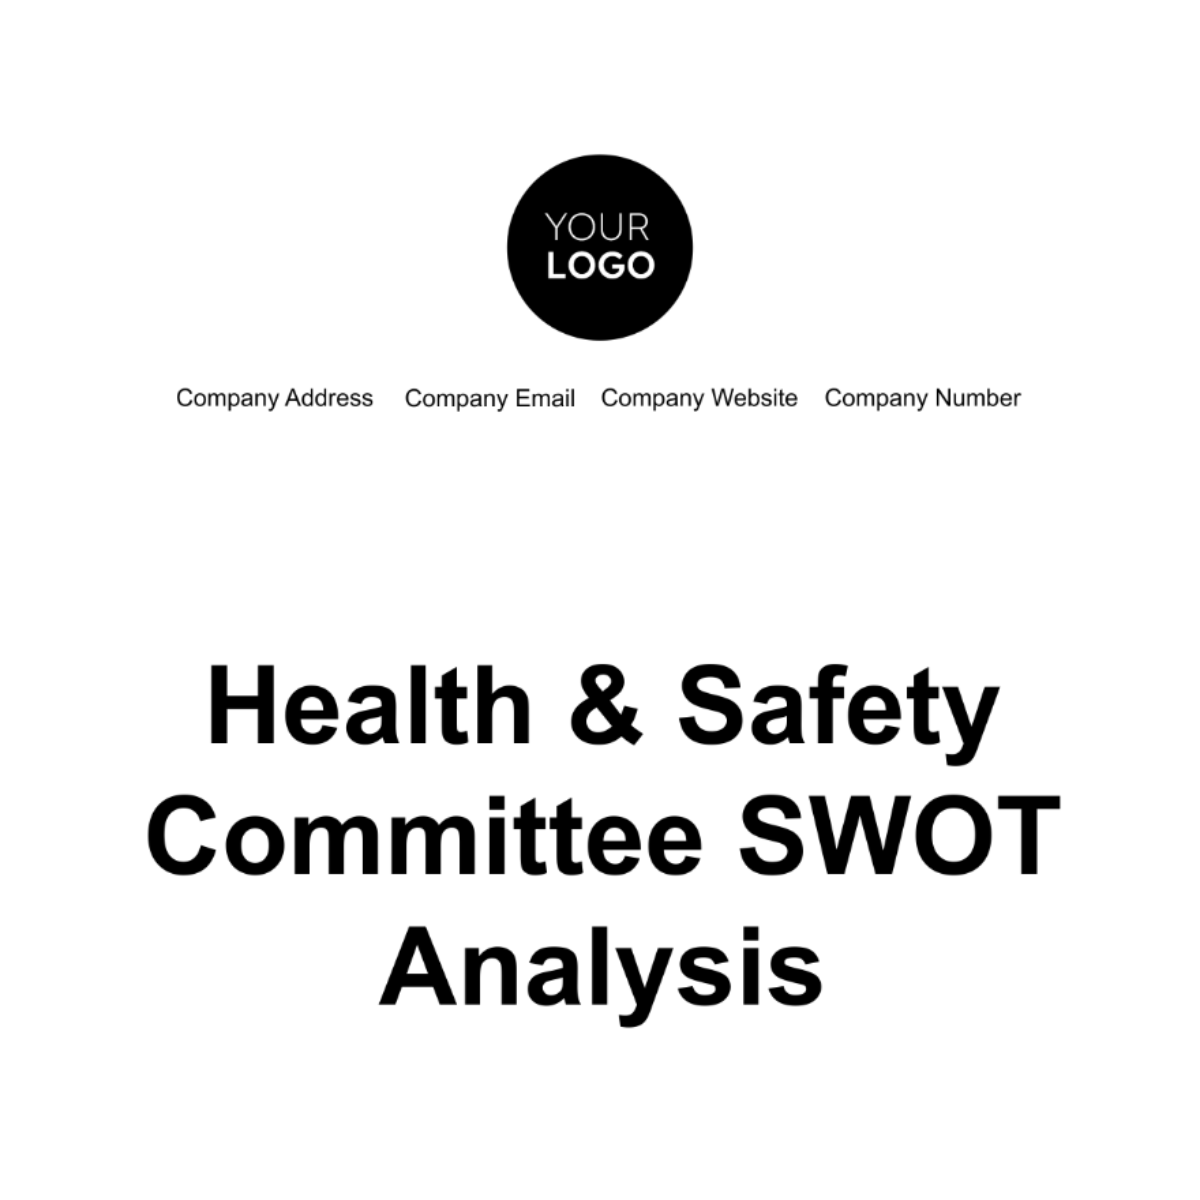 Free Health & Safety Committee SWOT Analysis Template